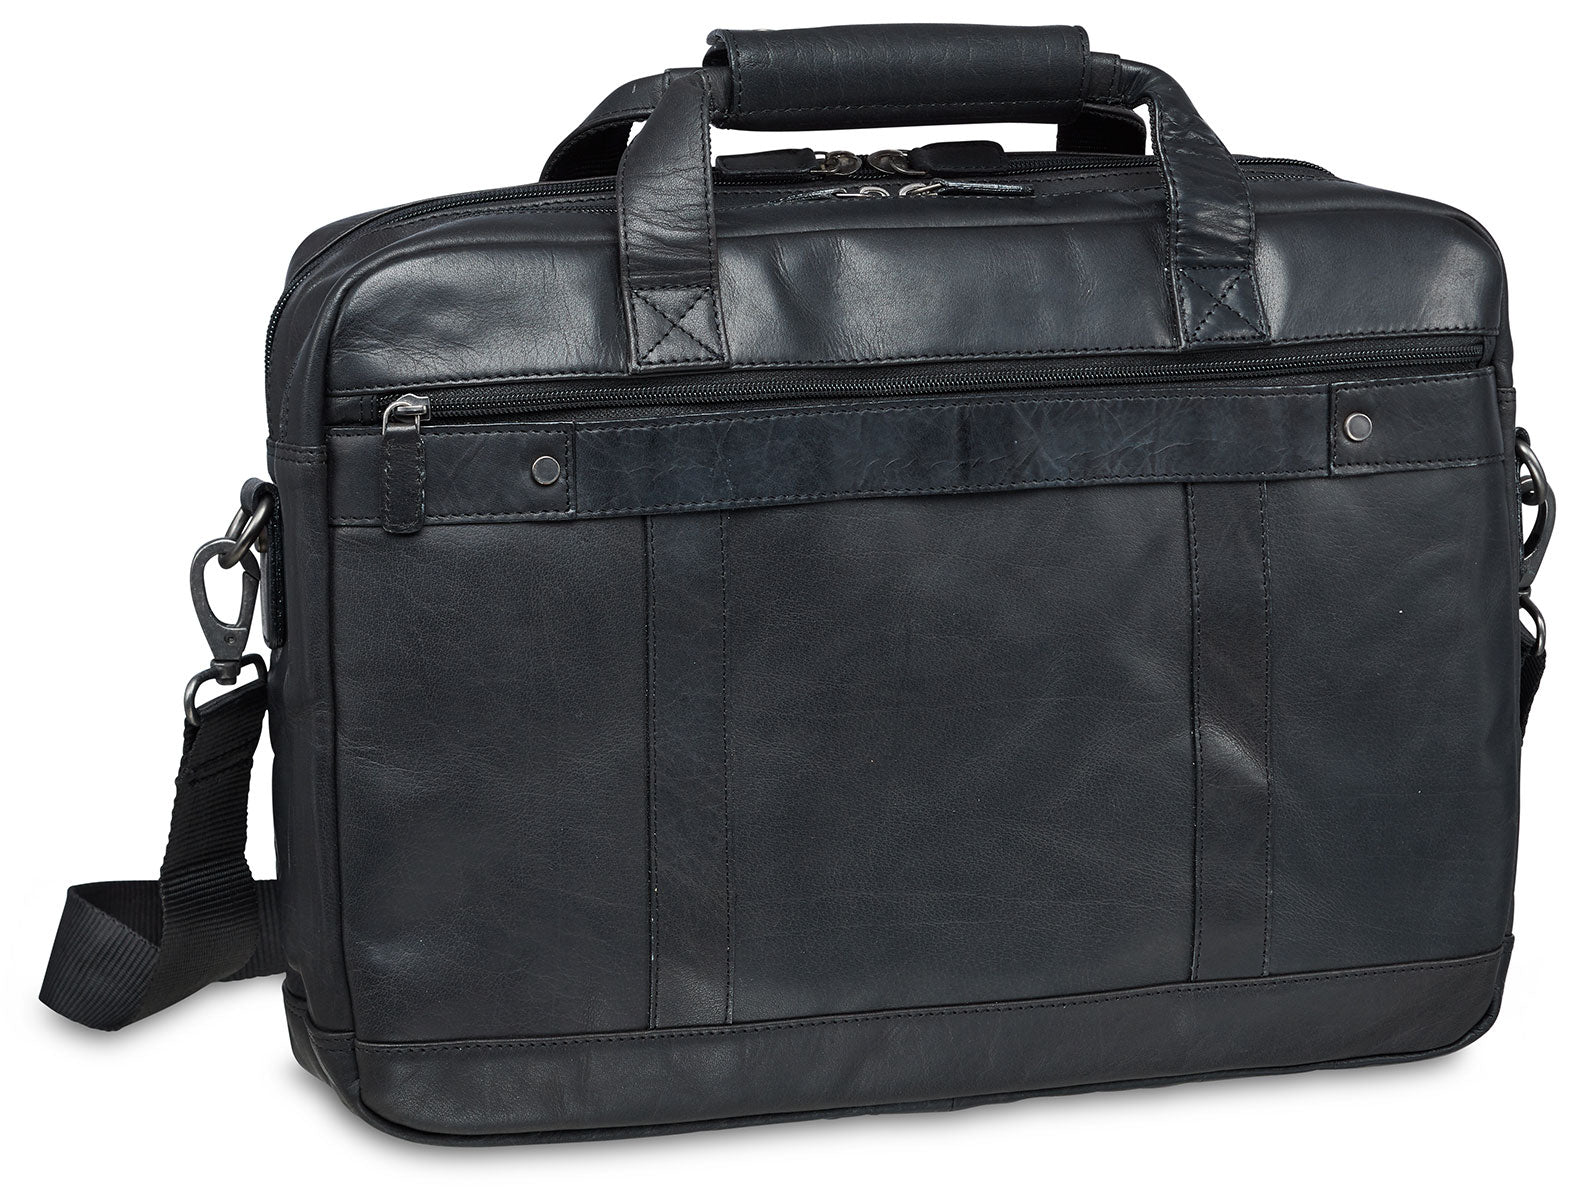 Mancini Leather Double Compartment Briefcase for 15.6" Laptop with RFID Secure Pocket, 16.25" x 4" x 12", Black